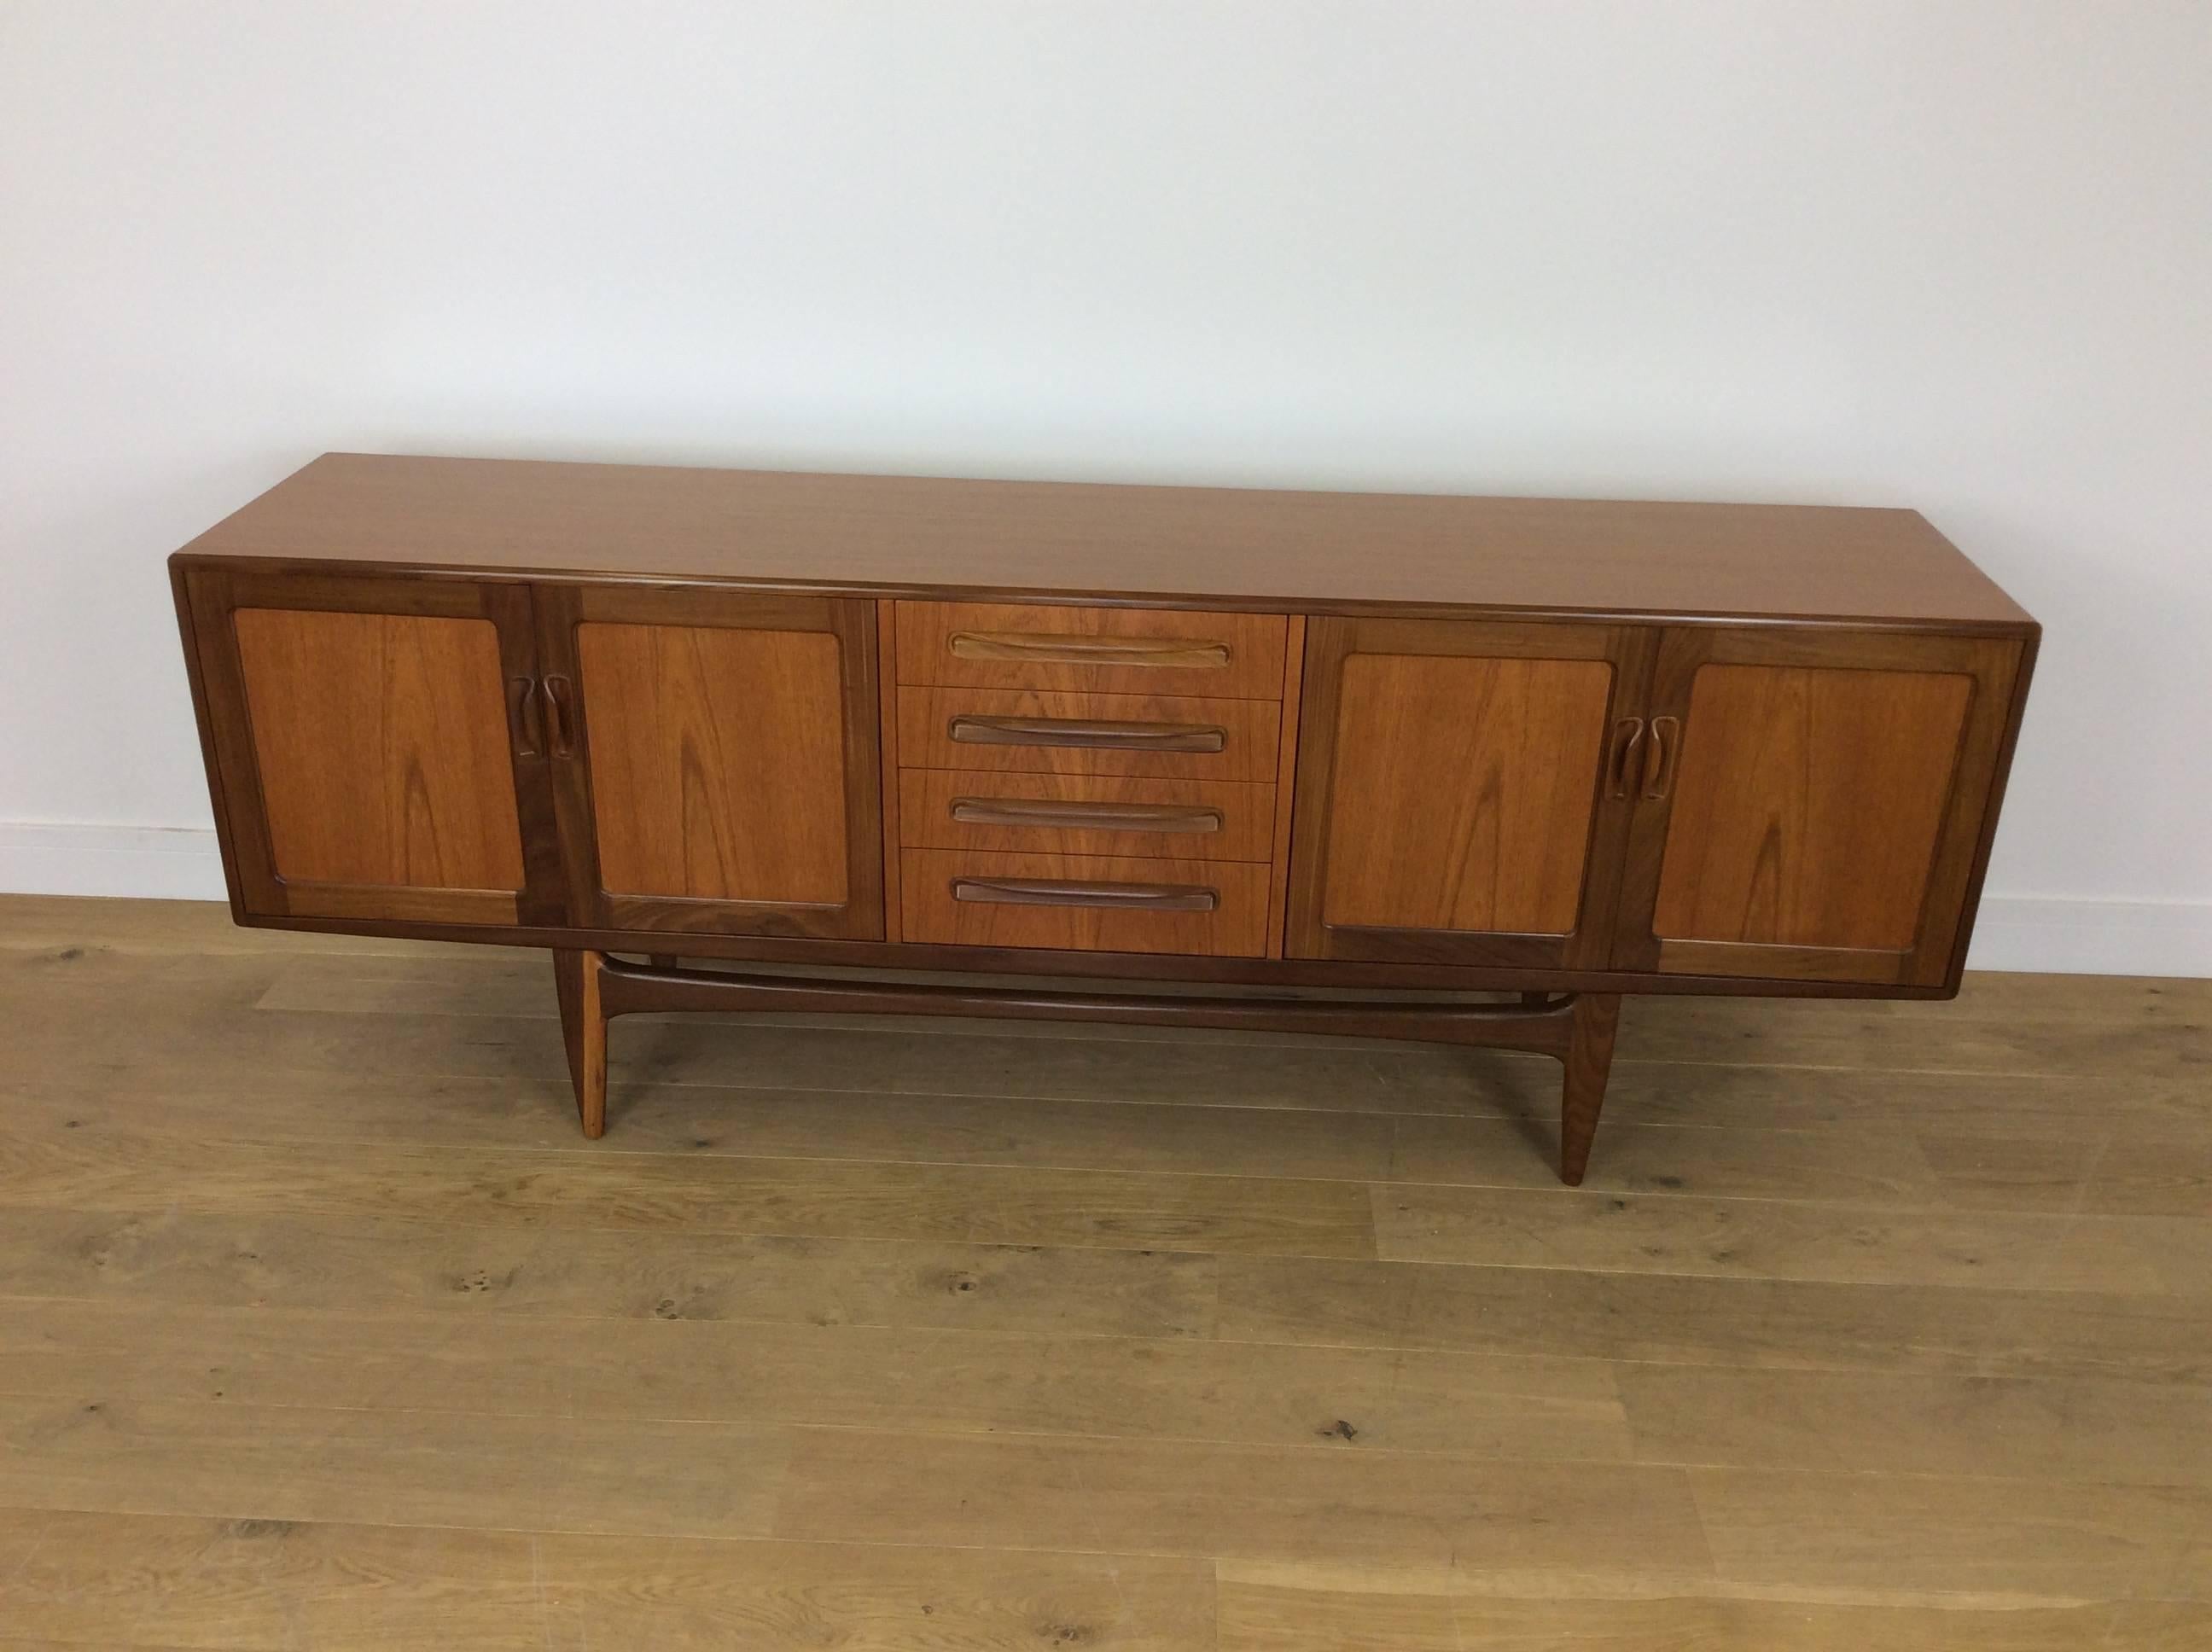 Midcentury sideboard credenza.
Midcentury long sideboard.
Beautiful contrasting woods.
Designed by V B Wilkins for Gplan.
Measures: 80 cm H, 214 cm W, 46 cm D
British, circa 1960.